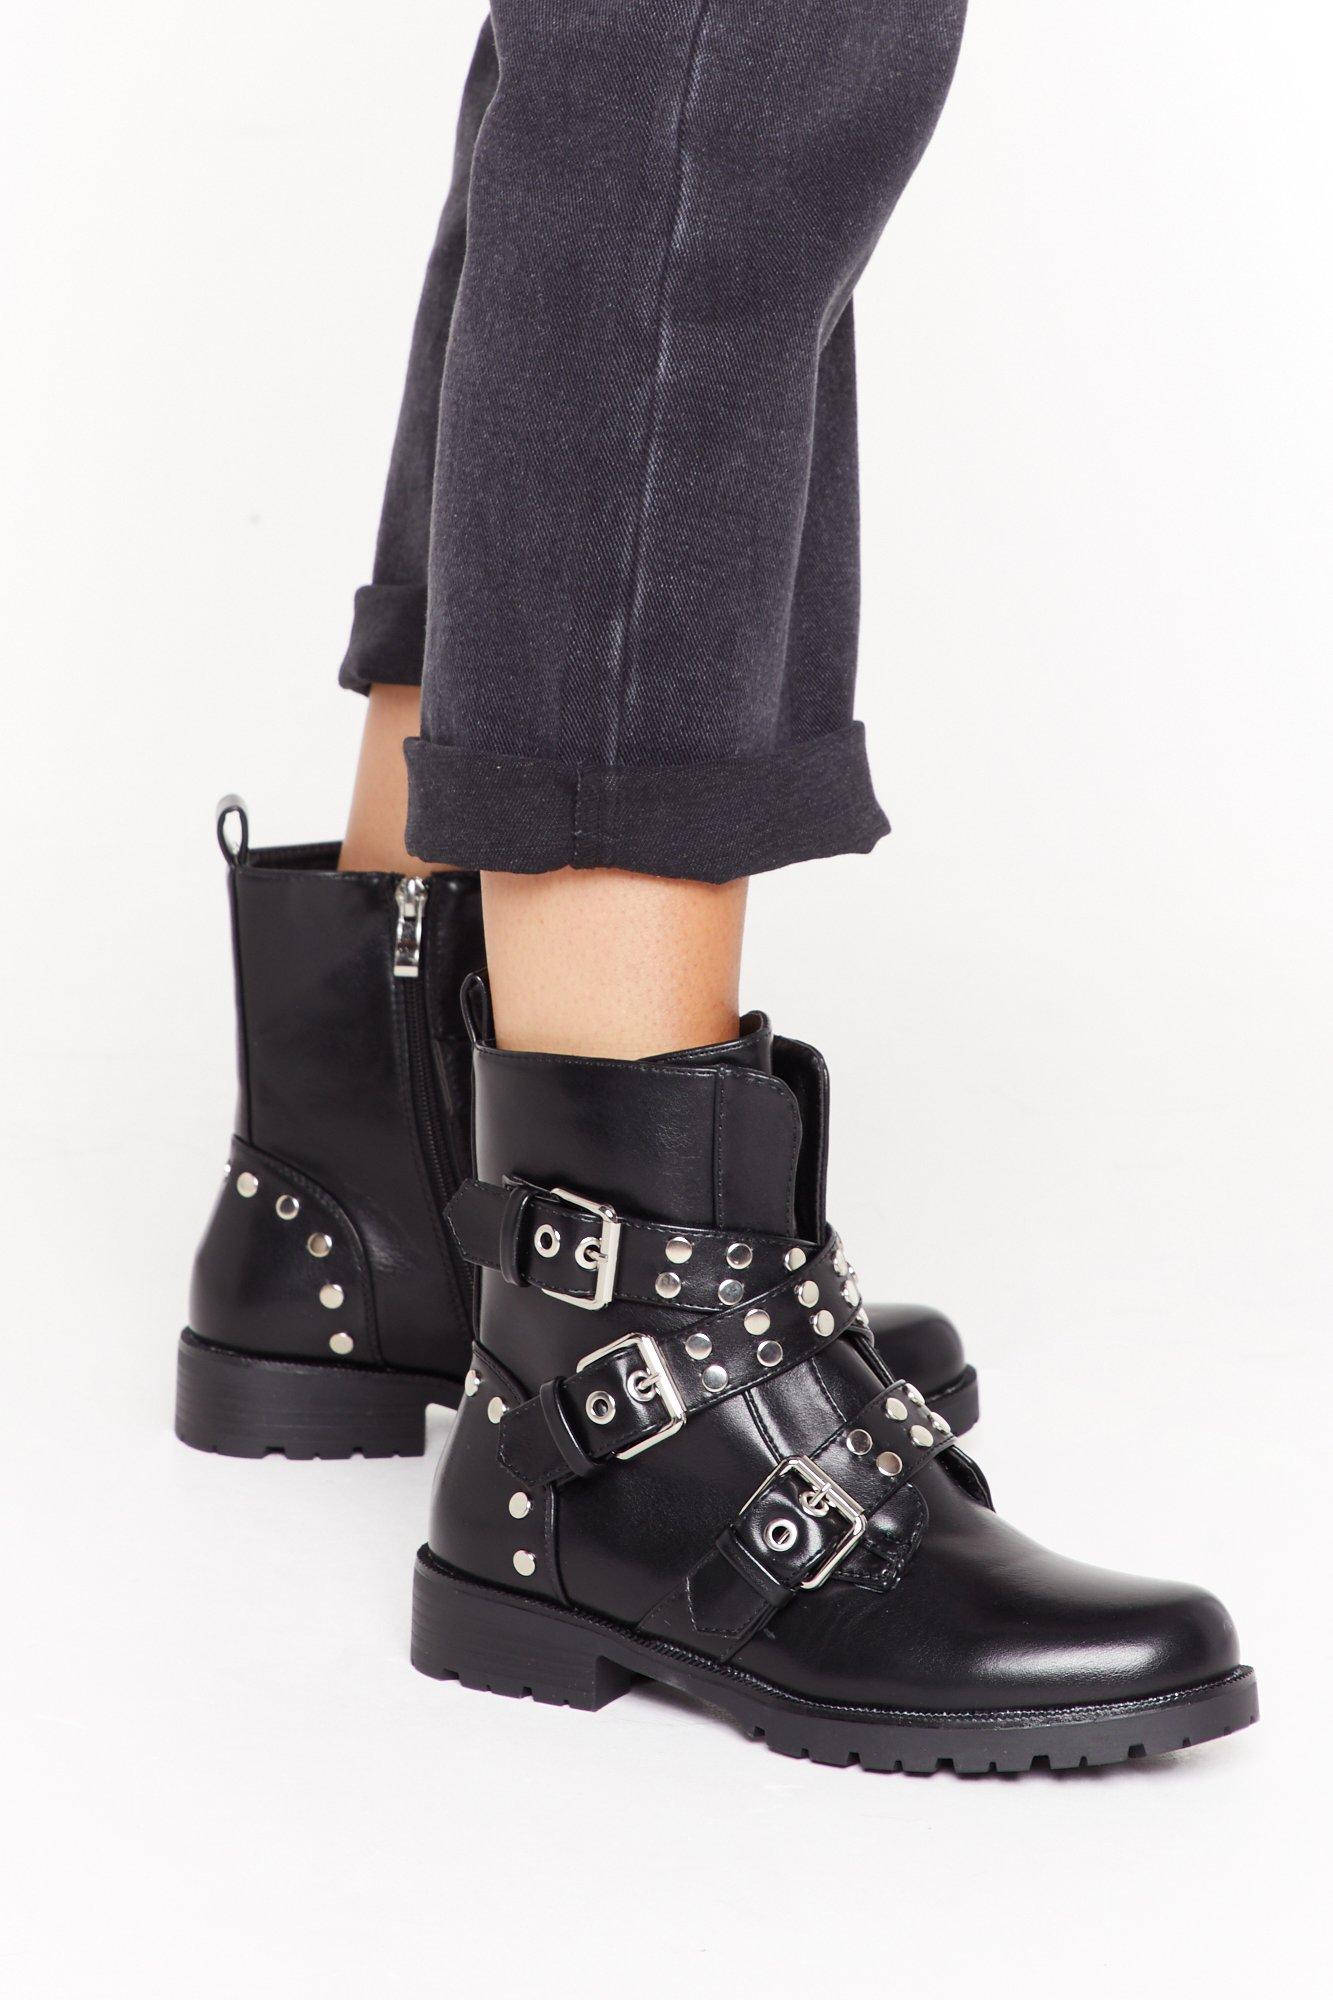 black leather booties with buckles